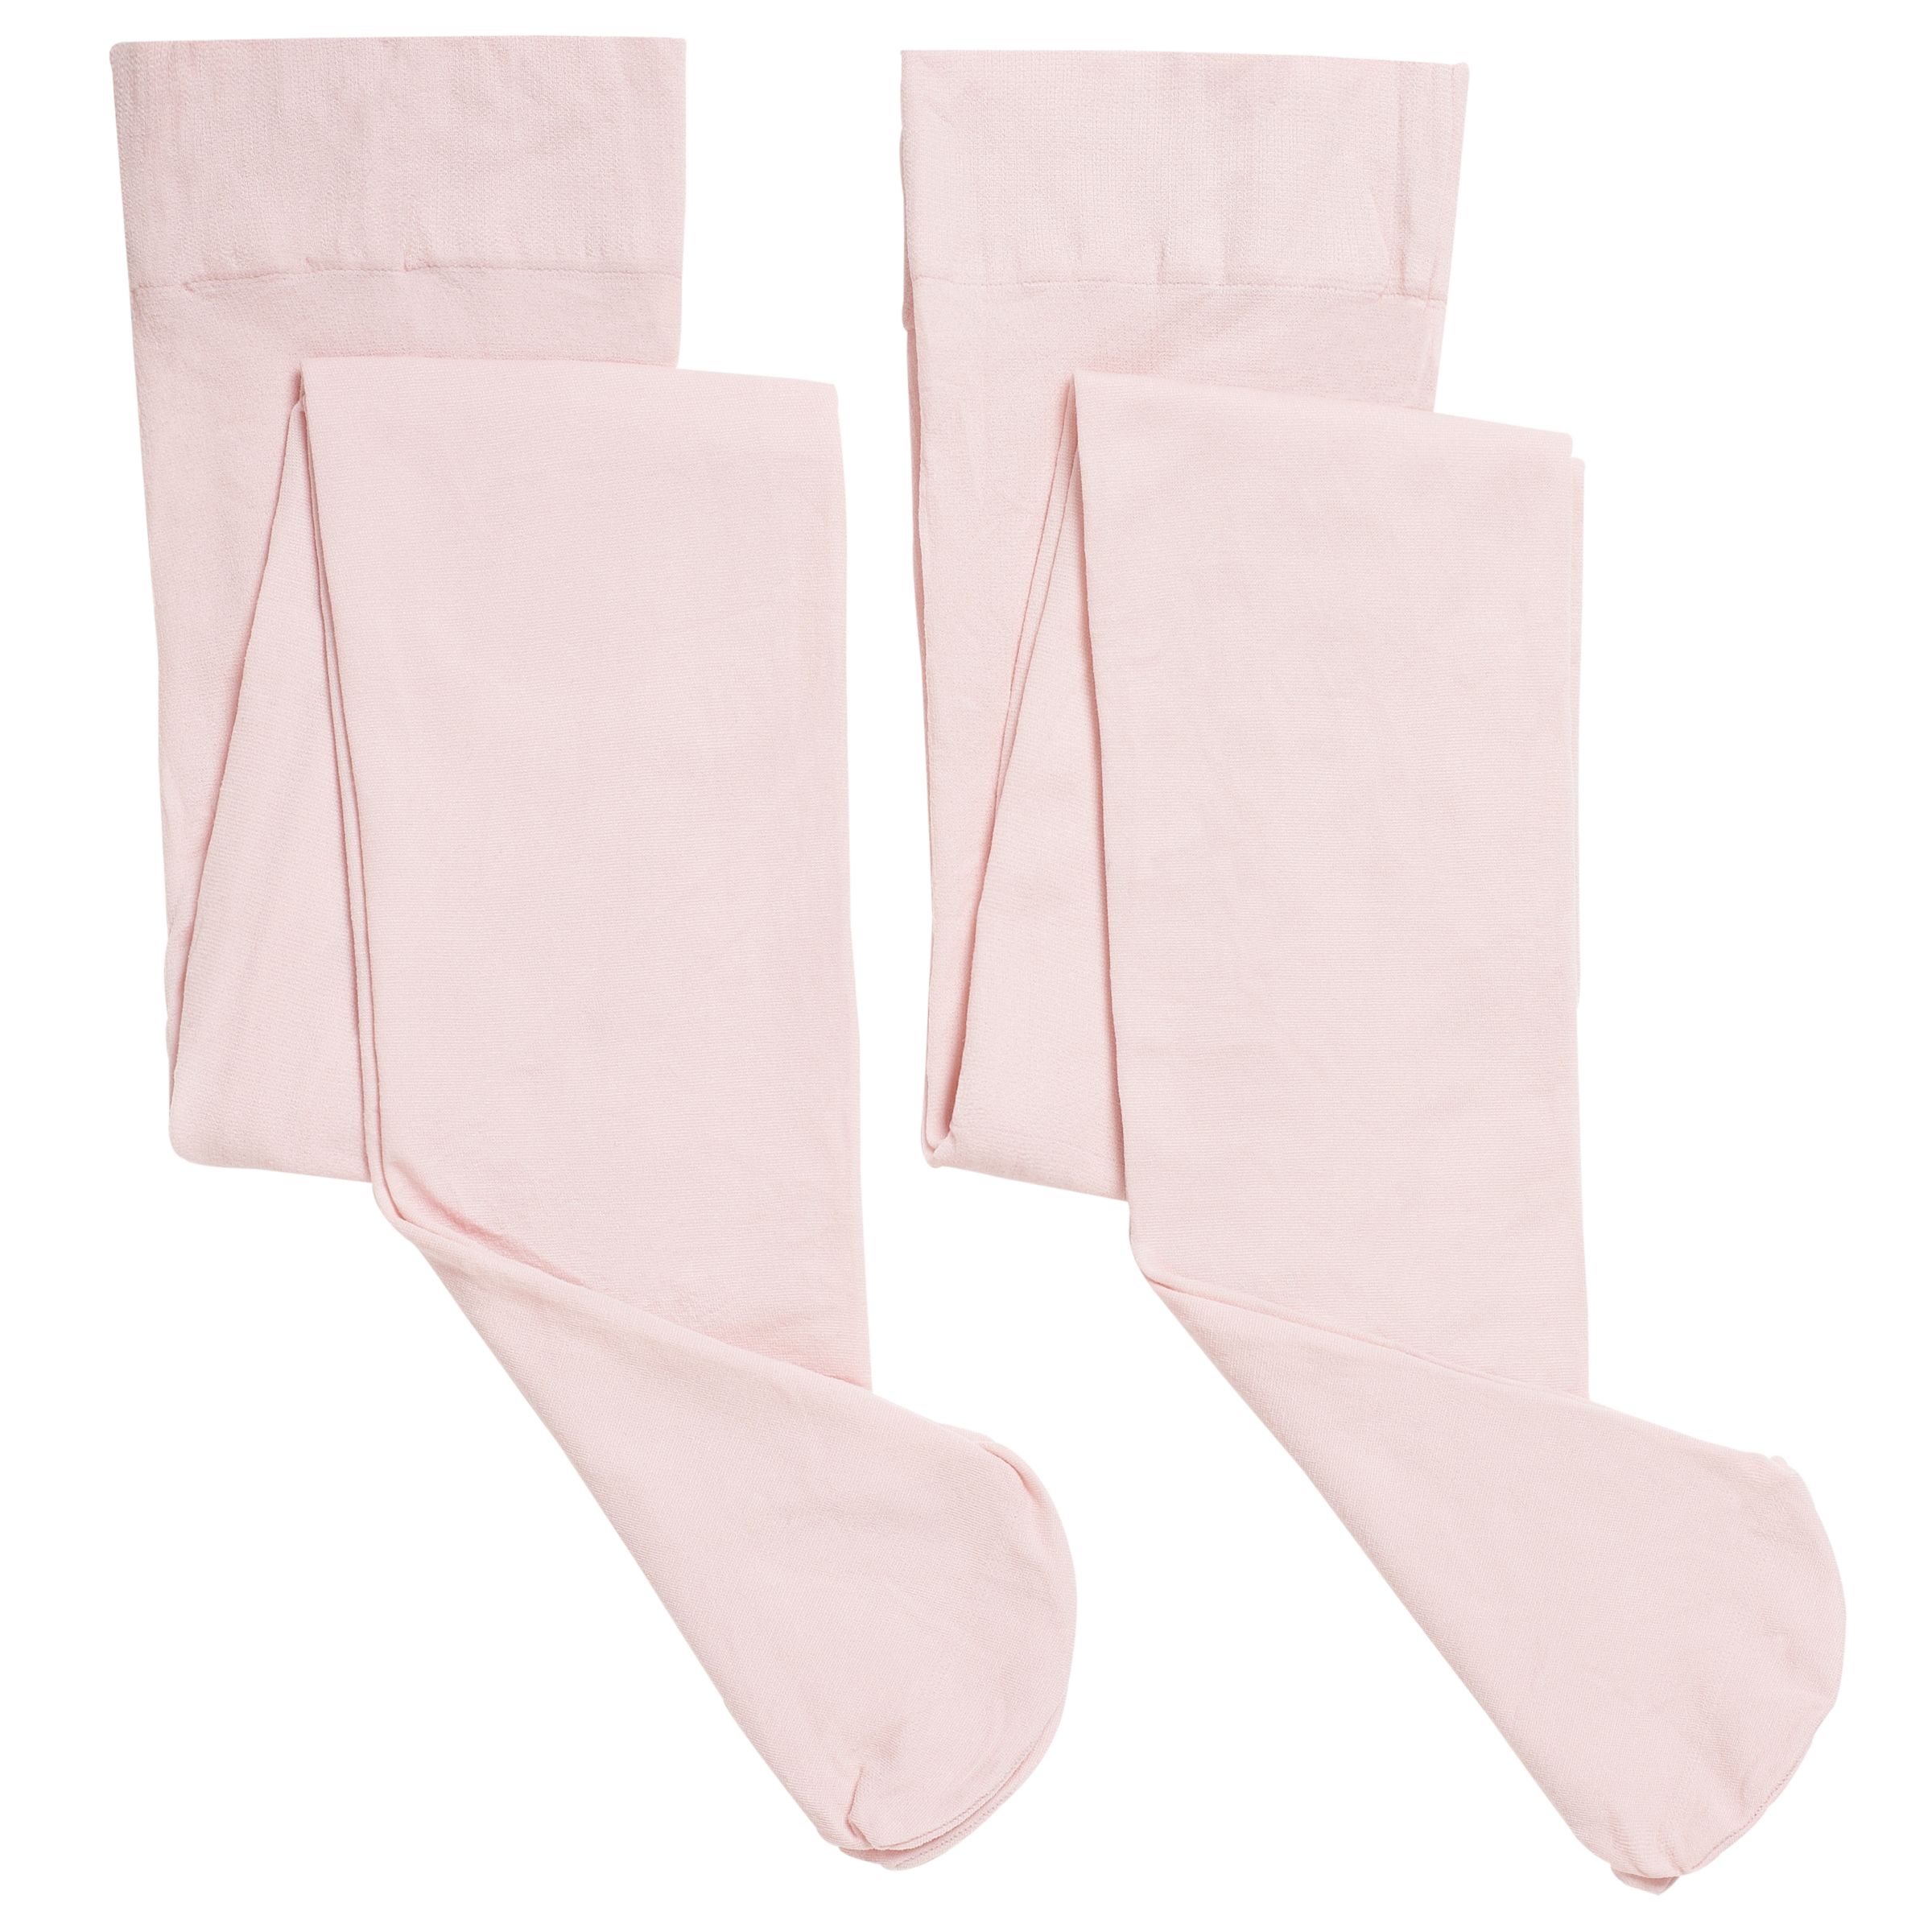 John Lewis ANYDAY Kids' Opaque Tights, Pack of 2, Pink, 3-4 Years